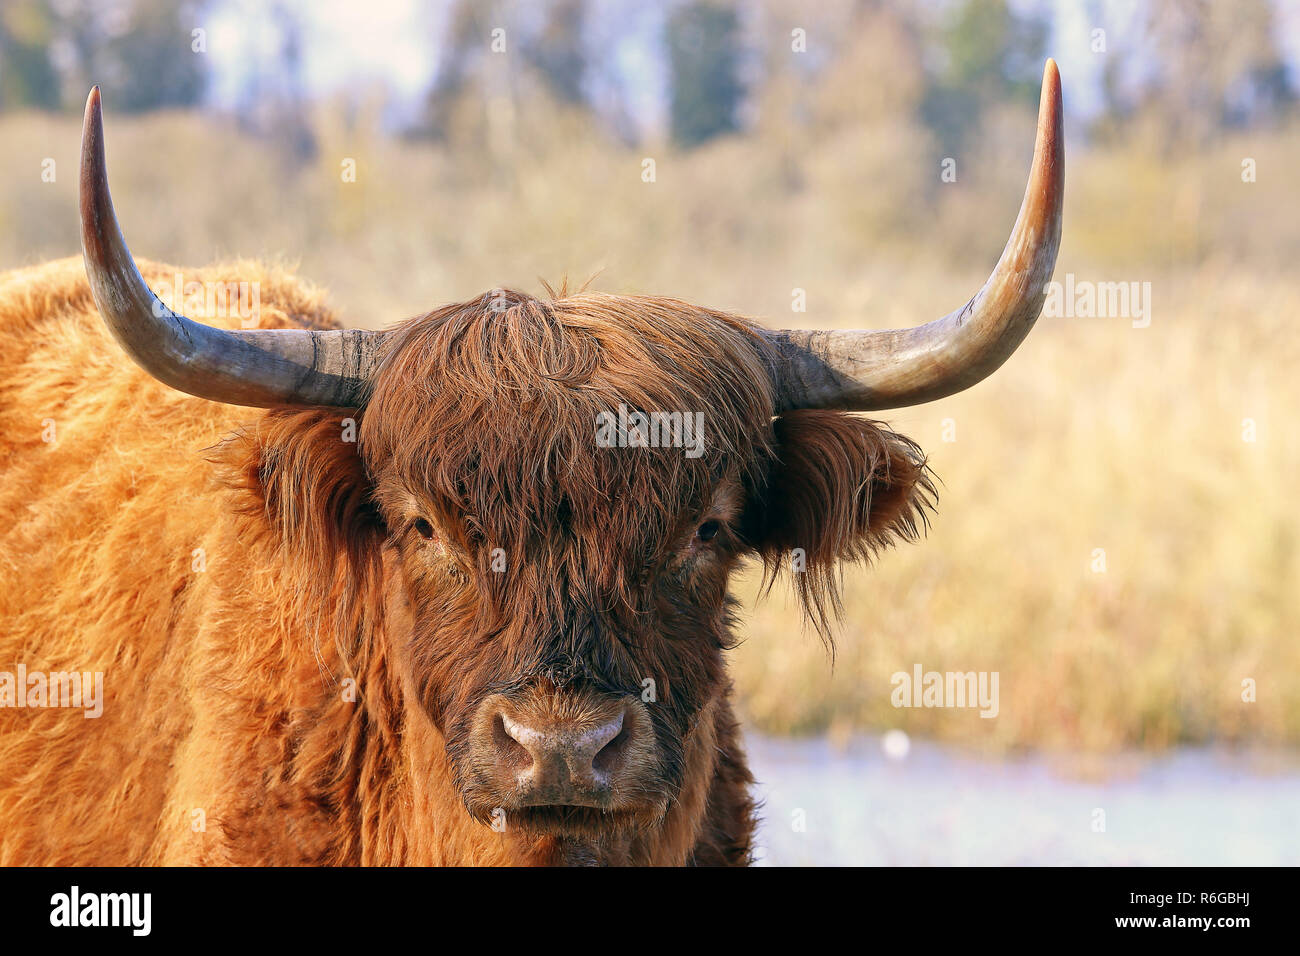 close-up scottish highland cattle in winter Stock Photo